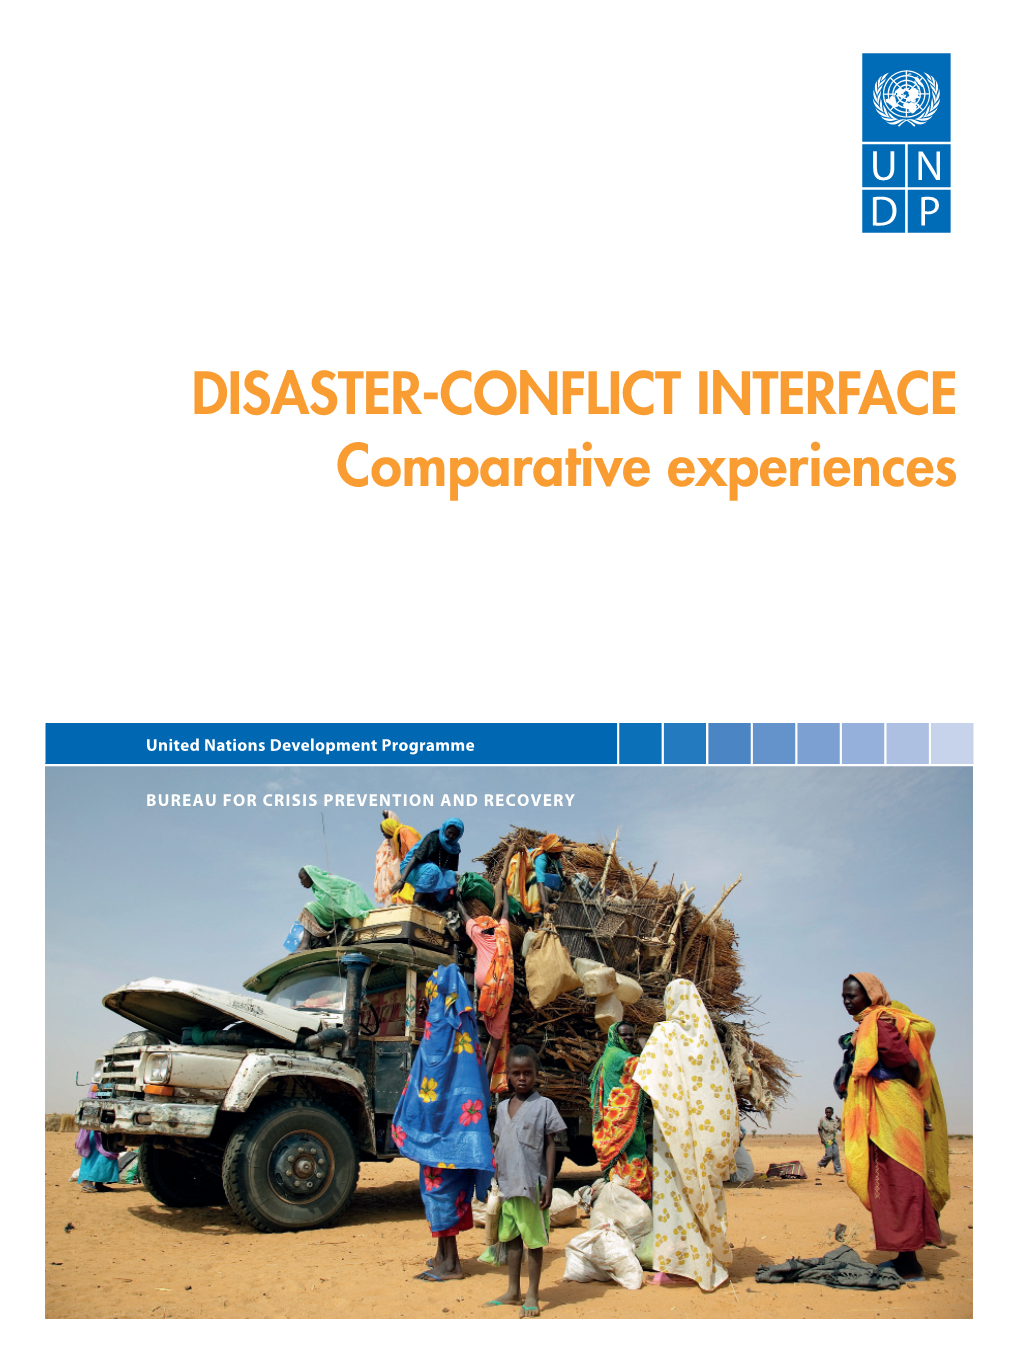 DISASTER-CONFLICT INTERFACE Comparative Experiences